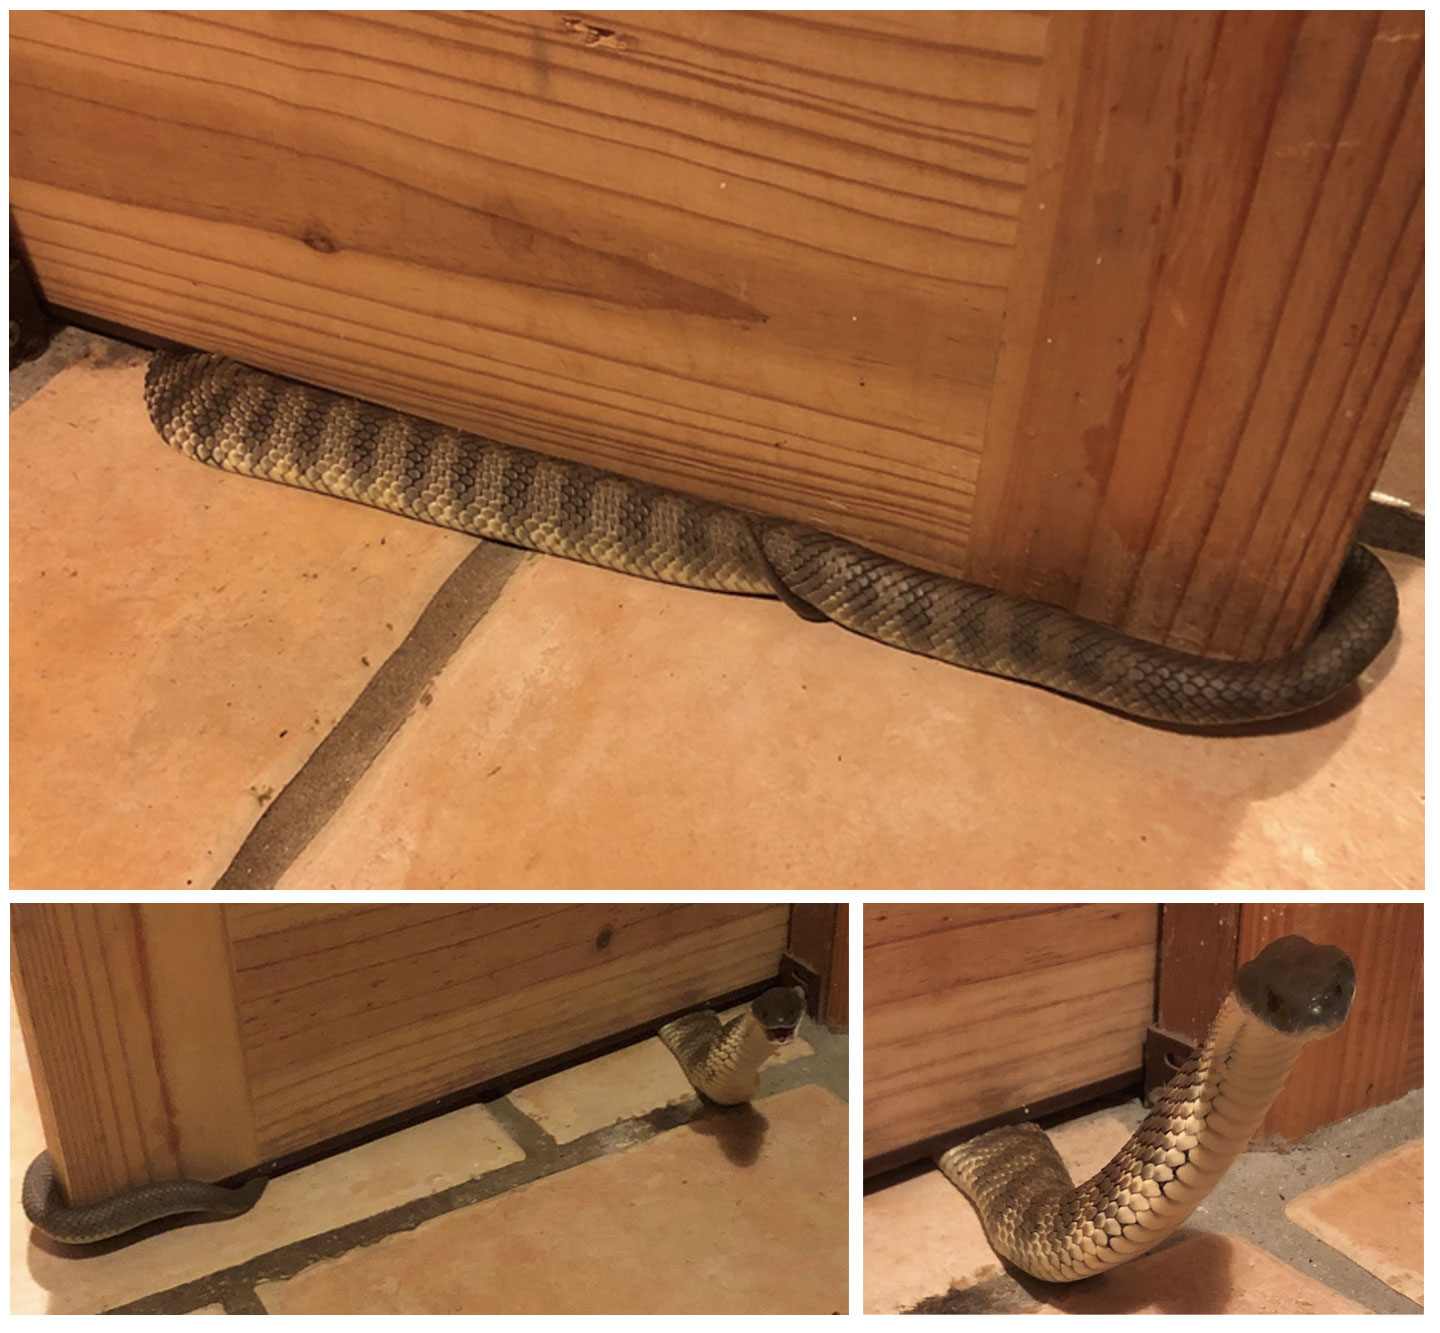 snake at front door meaning